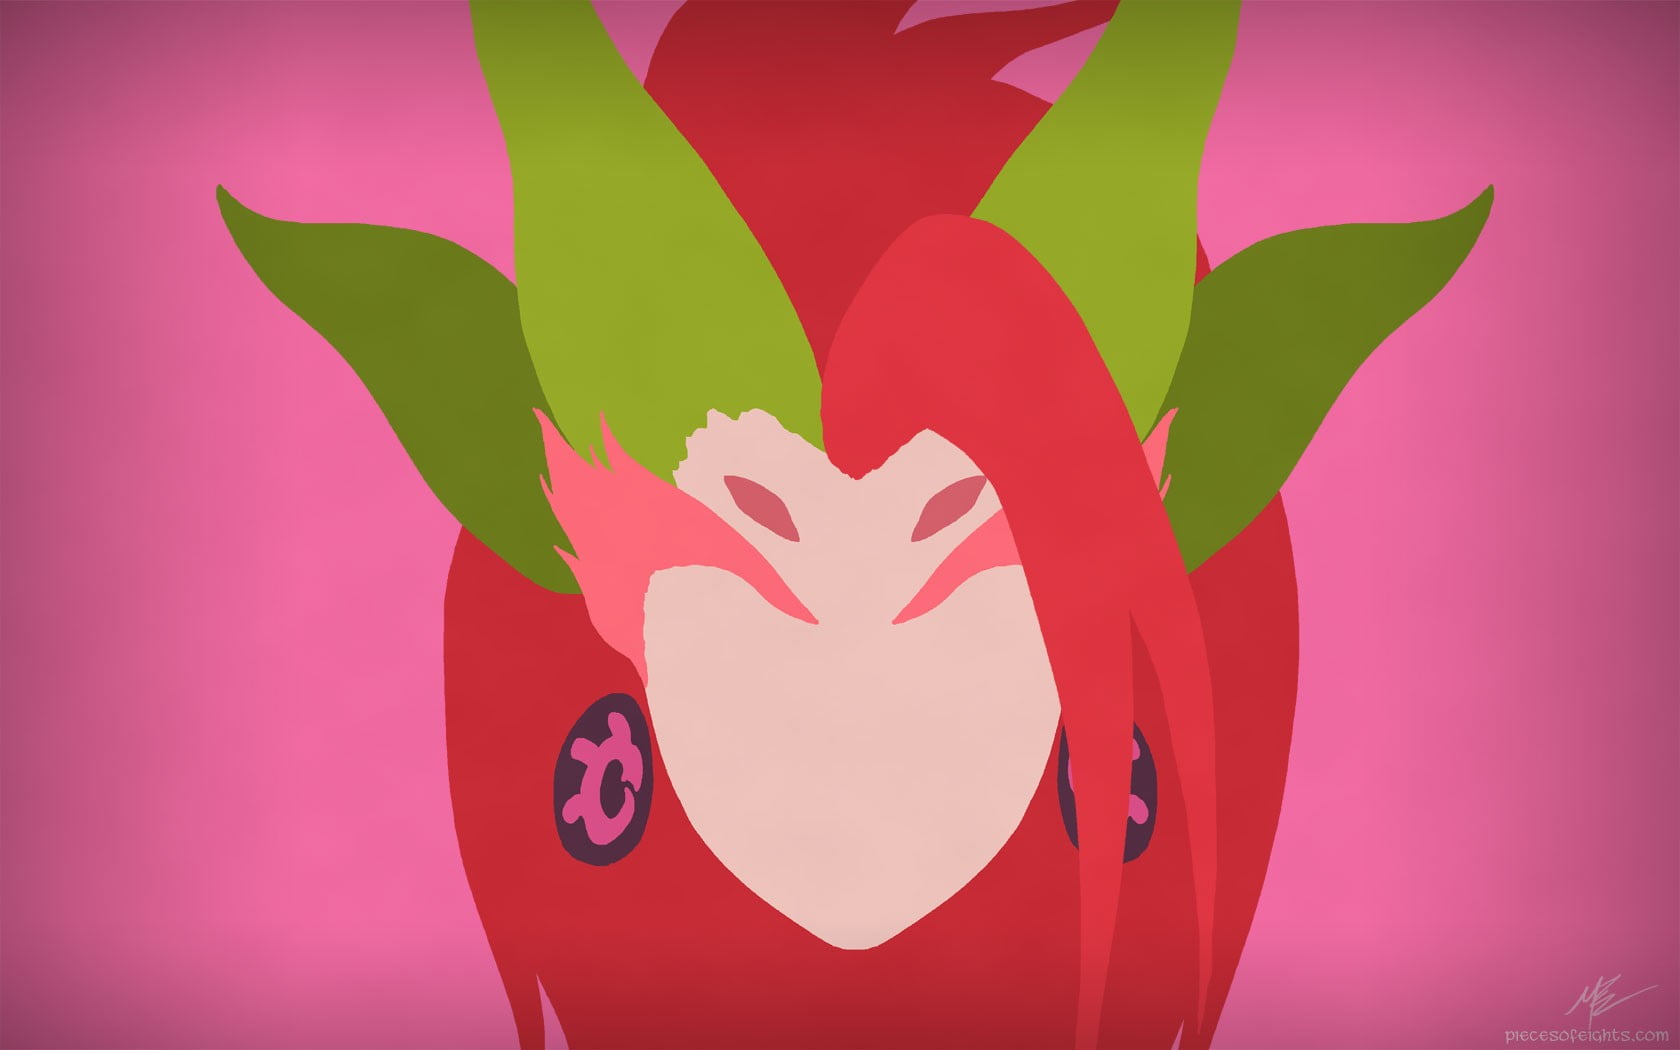 red and green female animated character, League of Legends, Zyra